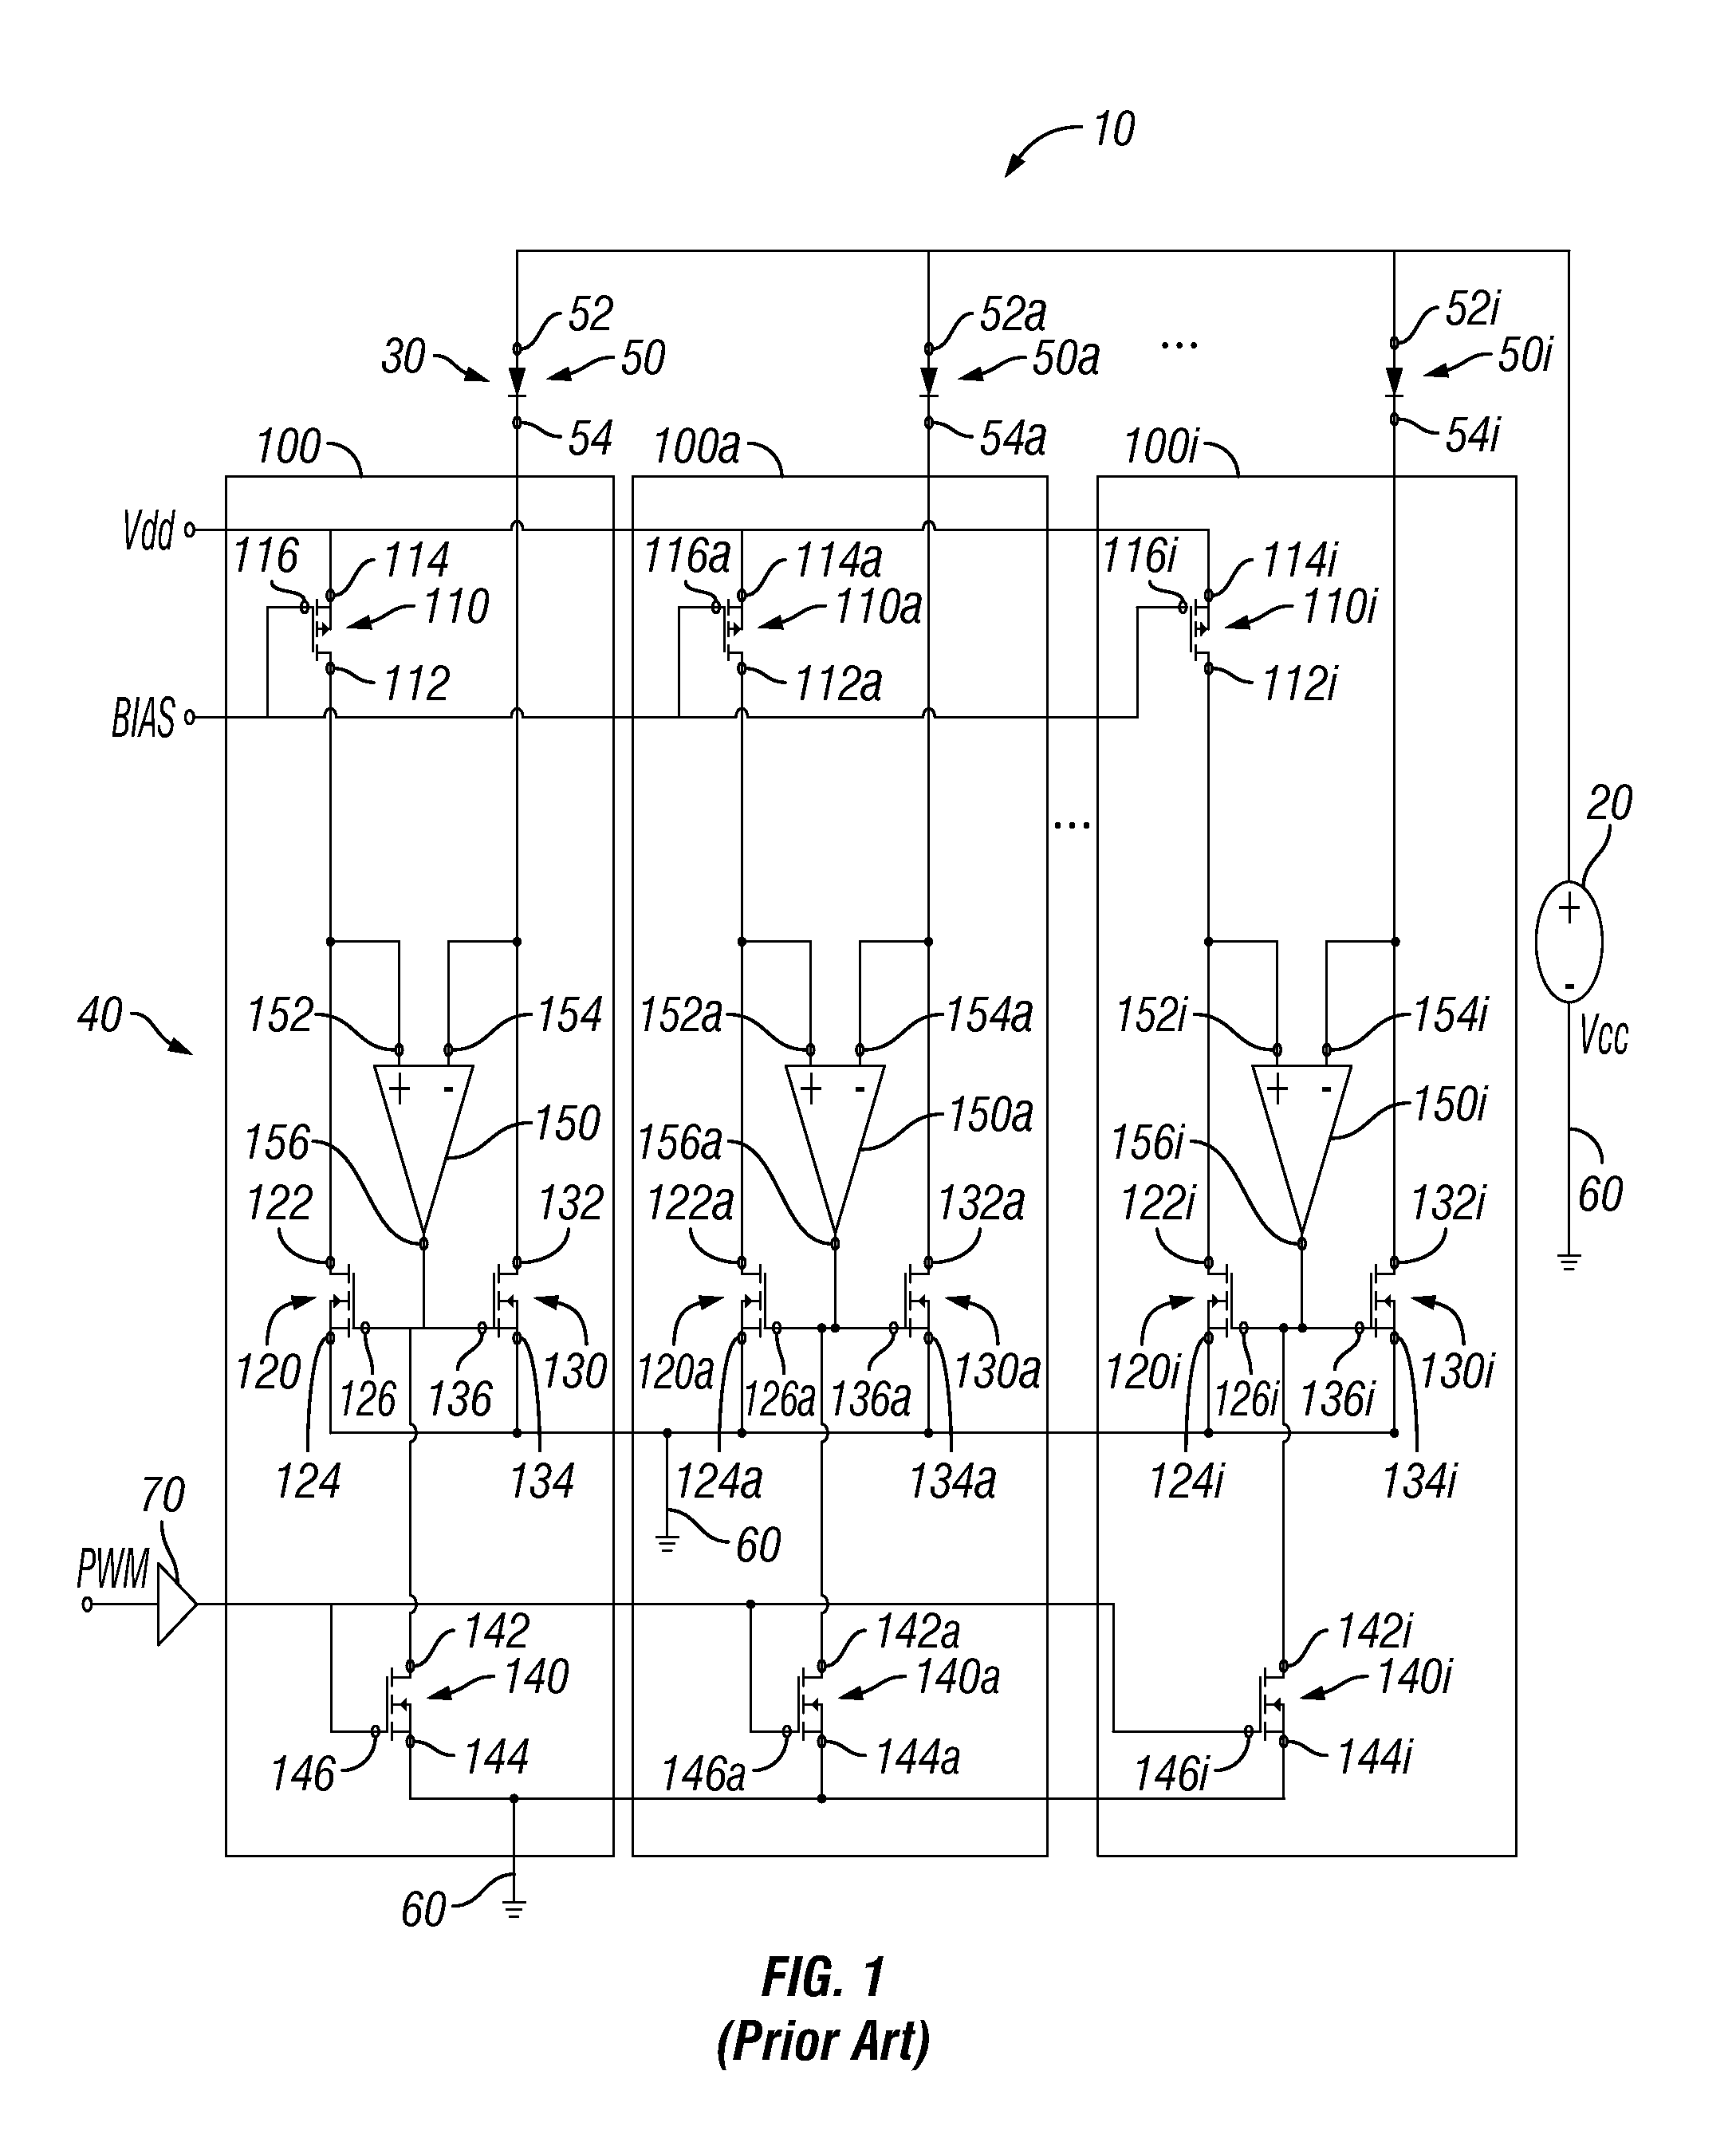 Dynamically controllable drive circuit for parallel array of light emitting diodes